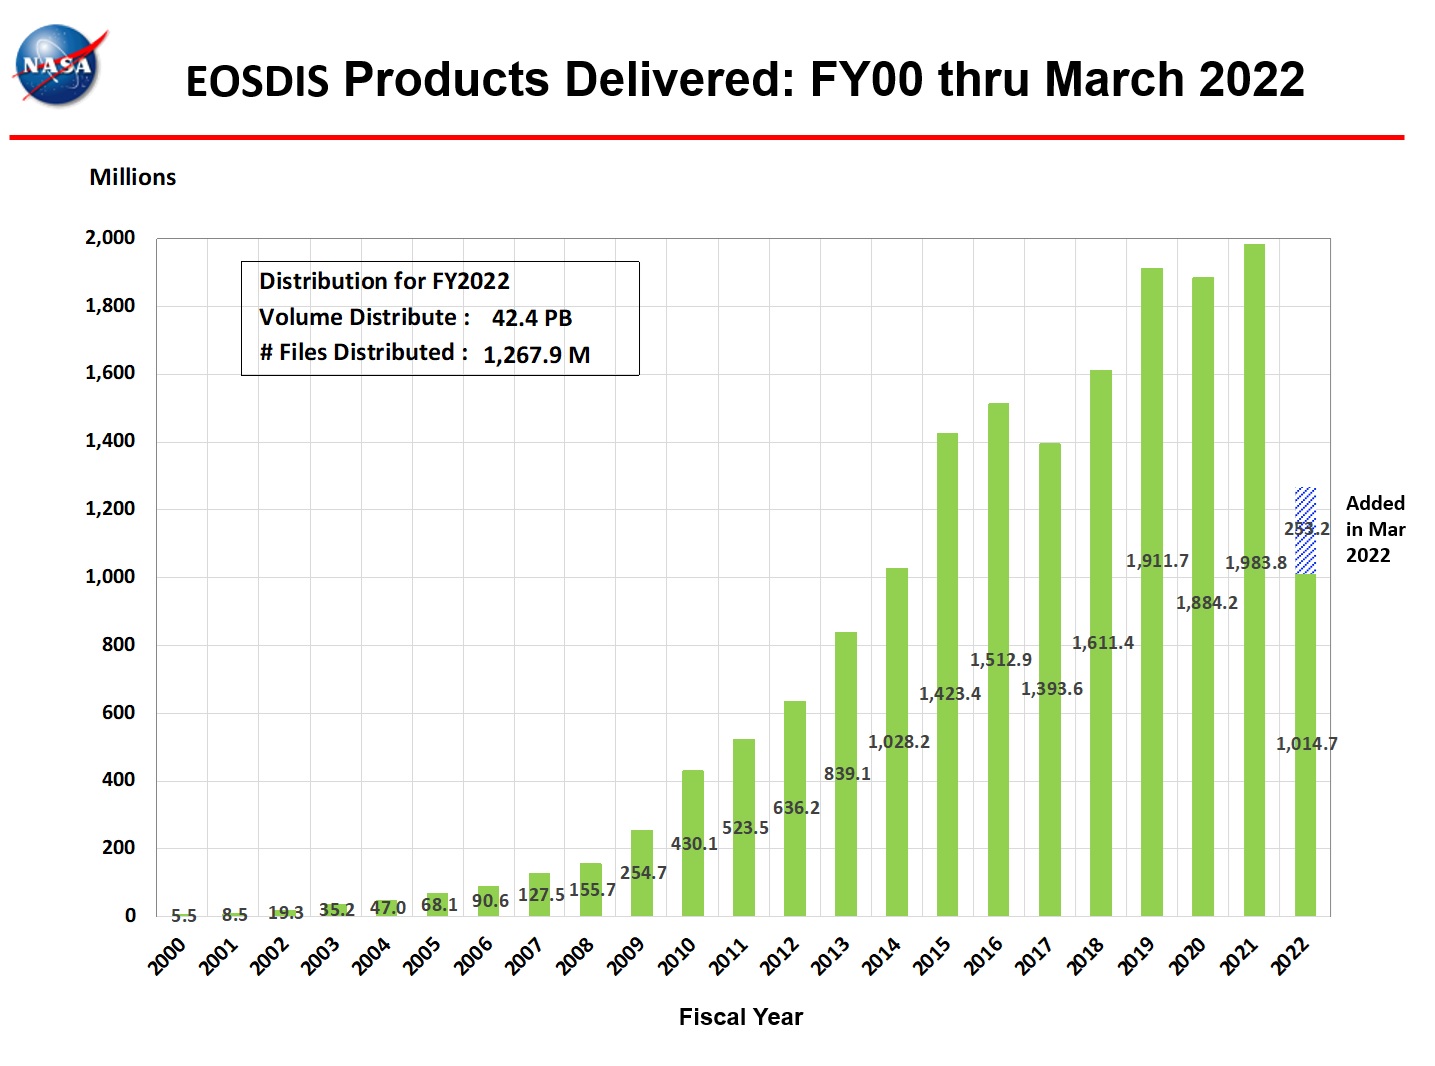 eosdis_products_delivered_3-2022.